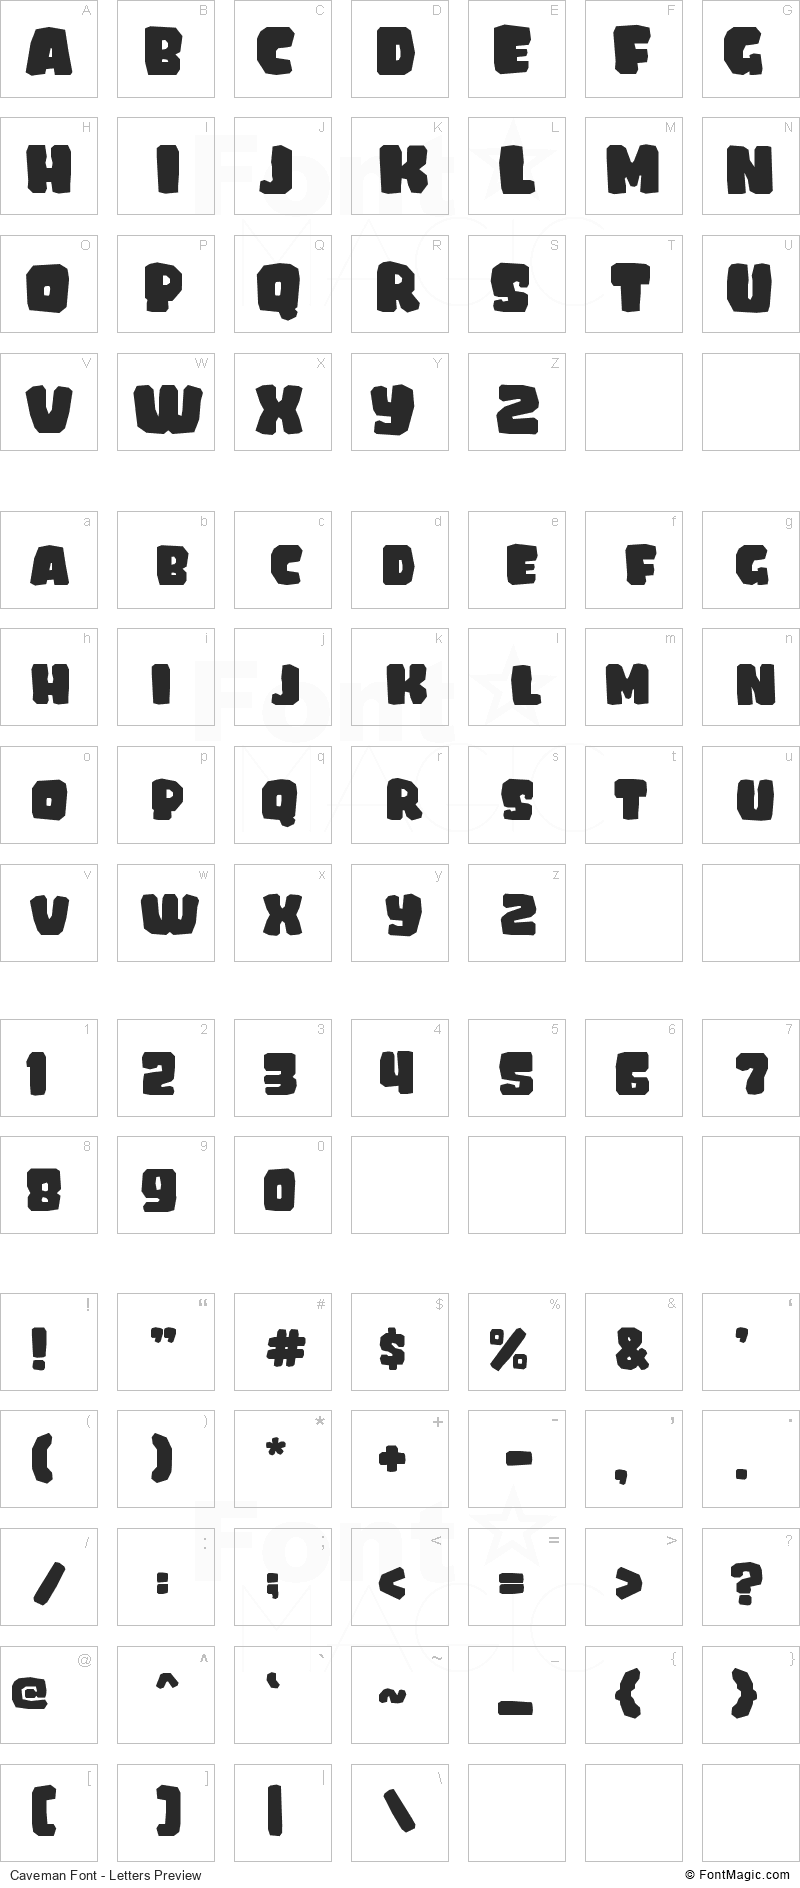 Caveman Font - All Latters Preview Chart